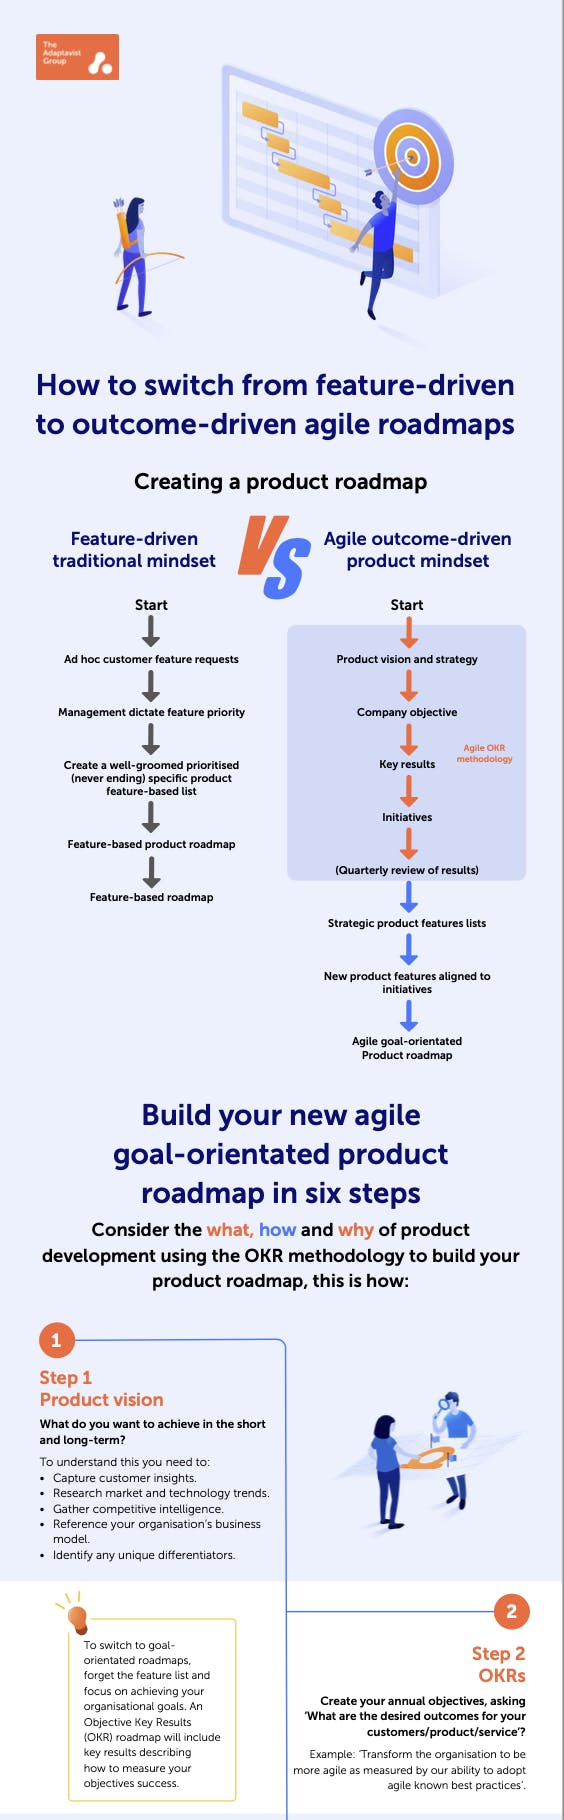 Creating an agile product roadmap infographic image